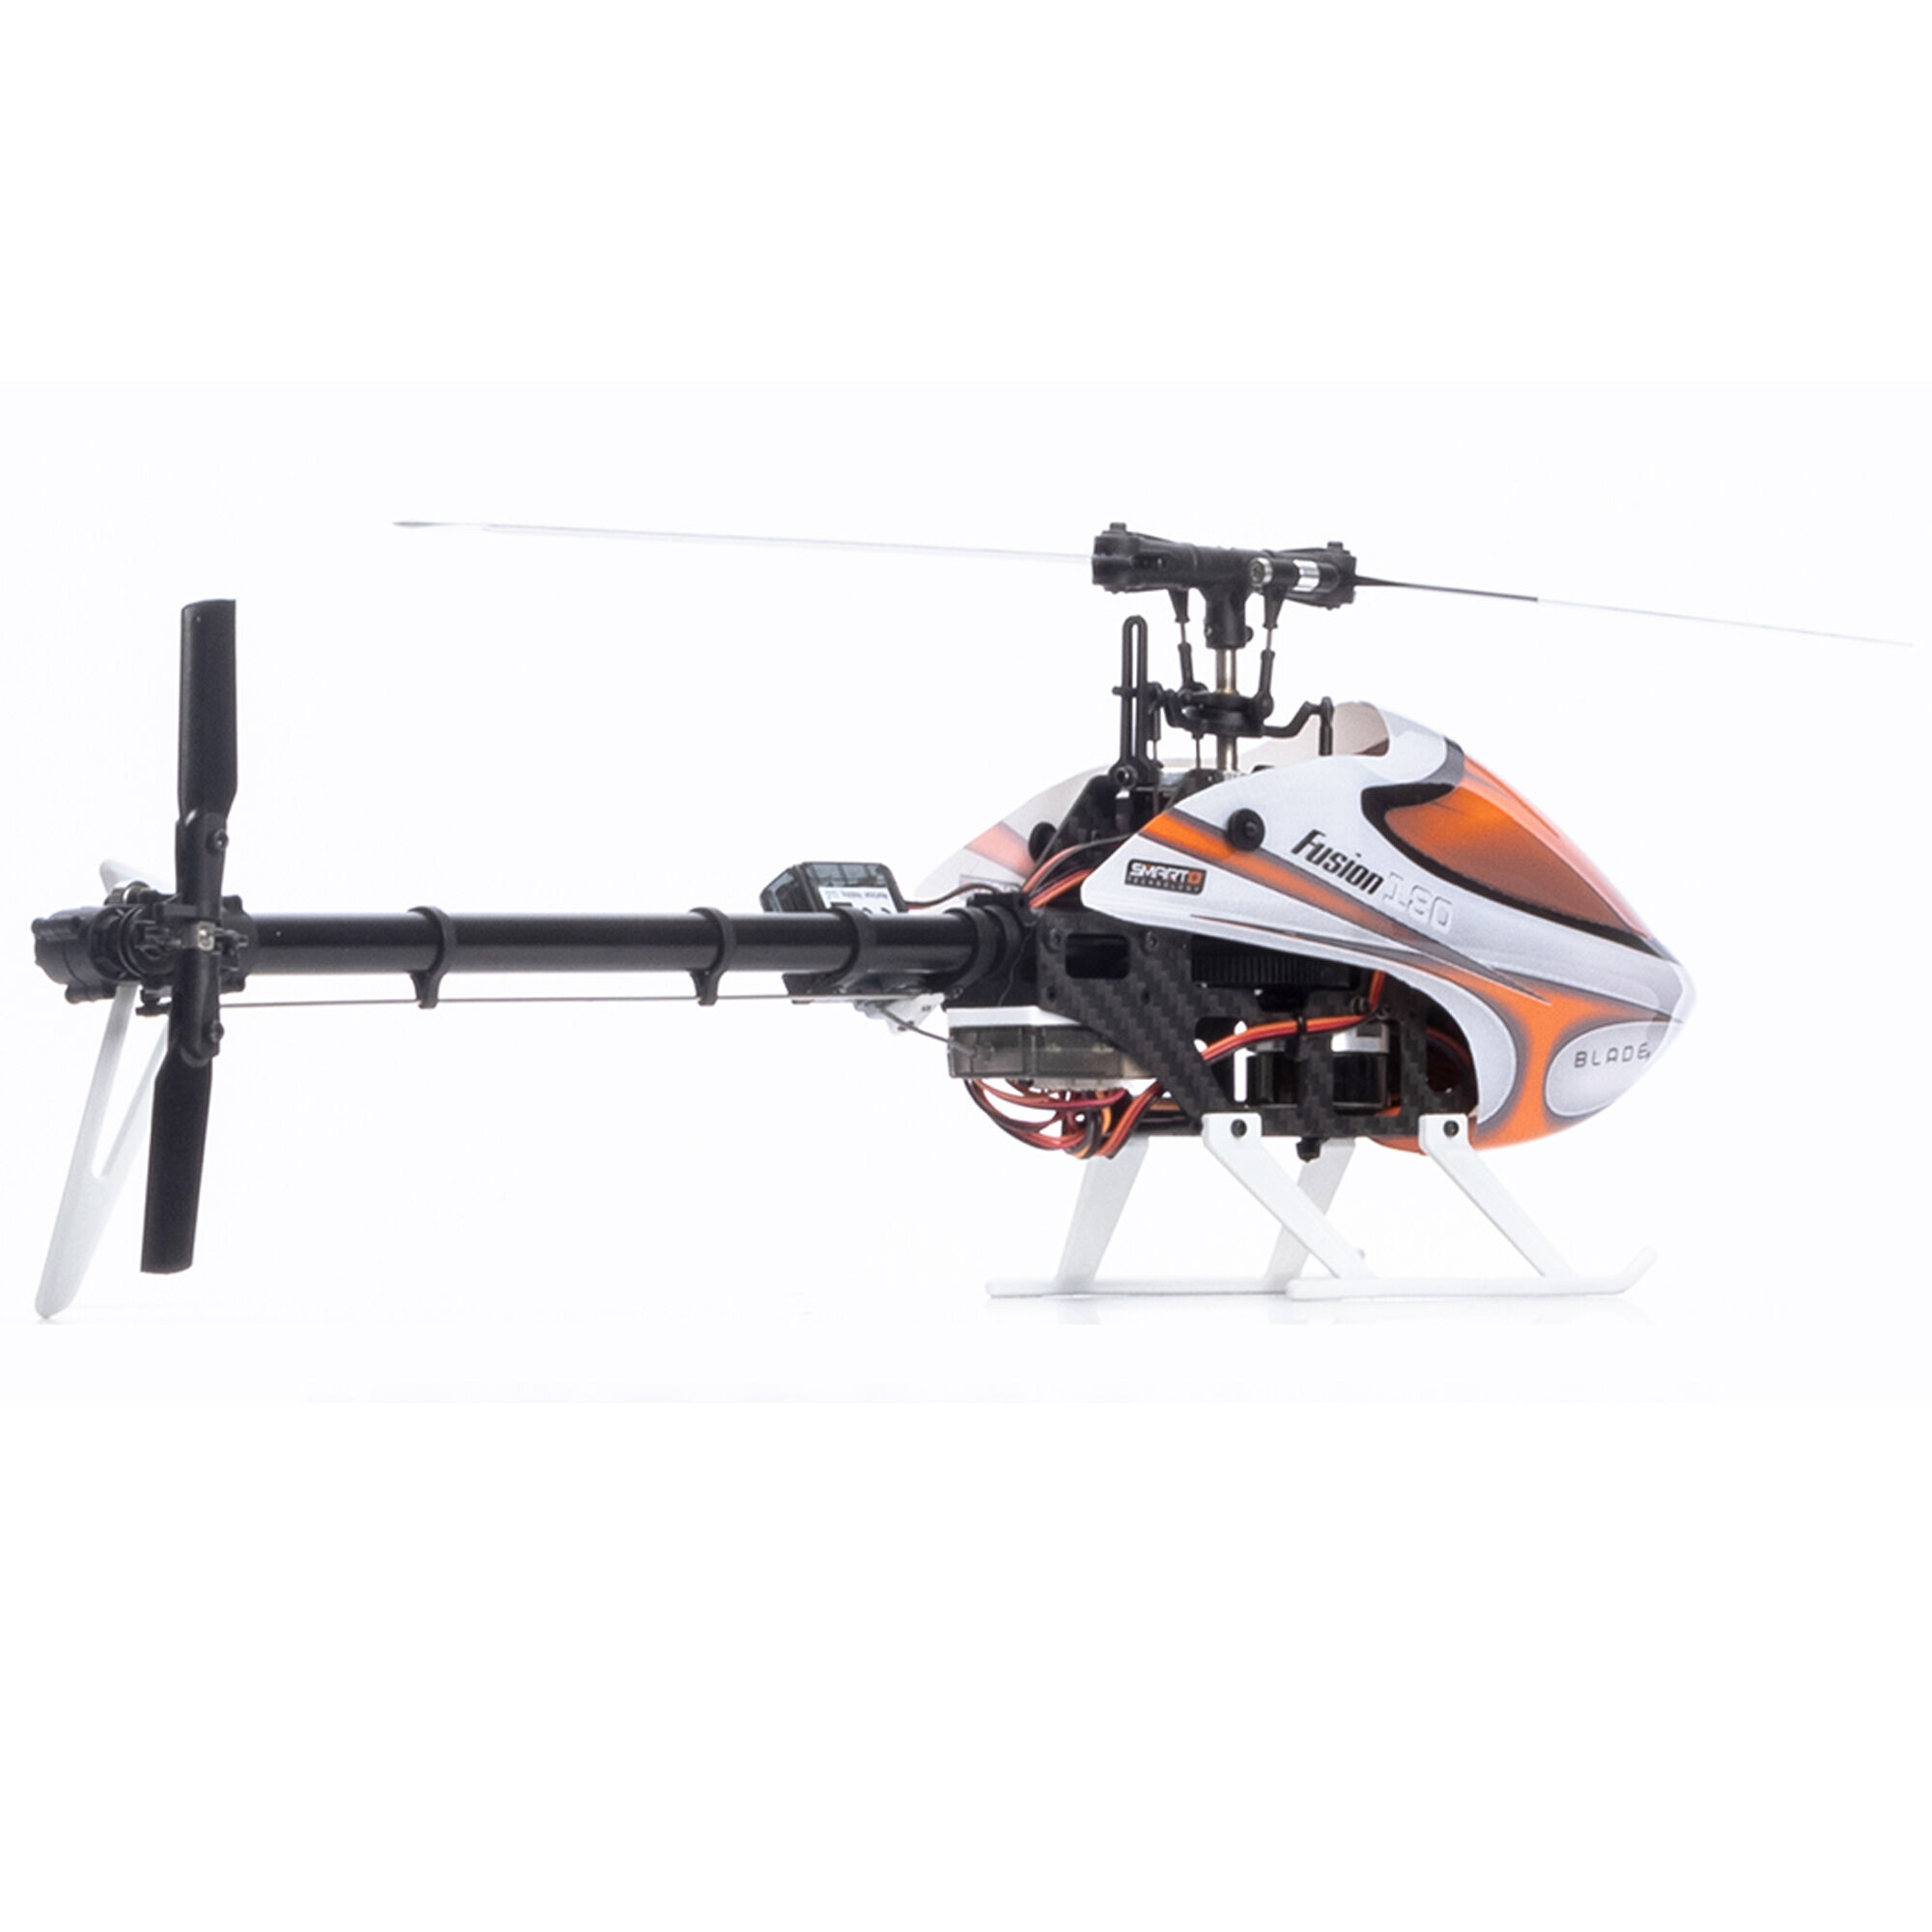 BLH5850 Blade Fusion 180 BNF Bind in Fly Basic Electric Flybarless RC Helicopter 